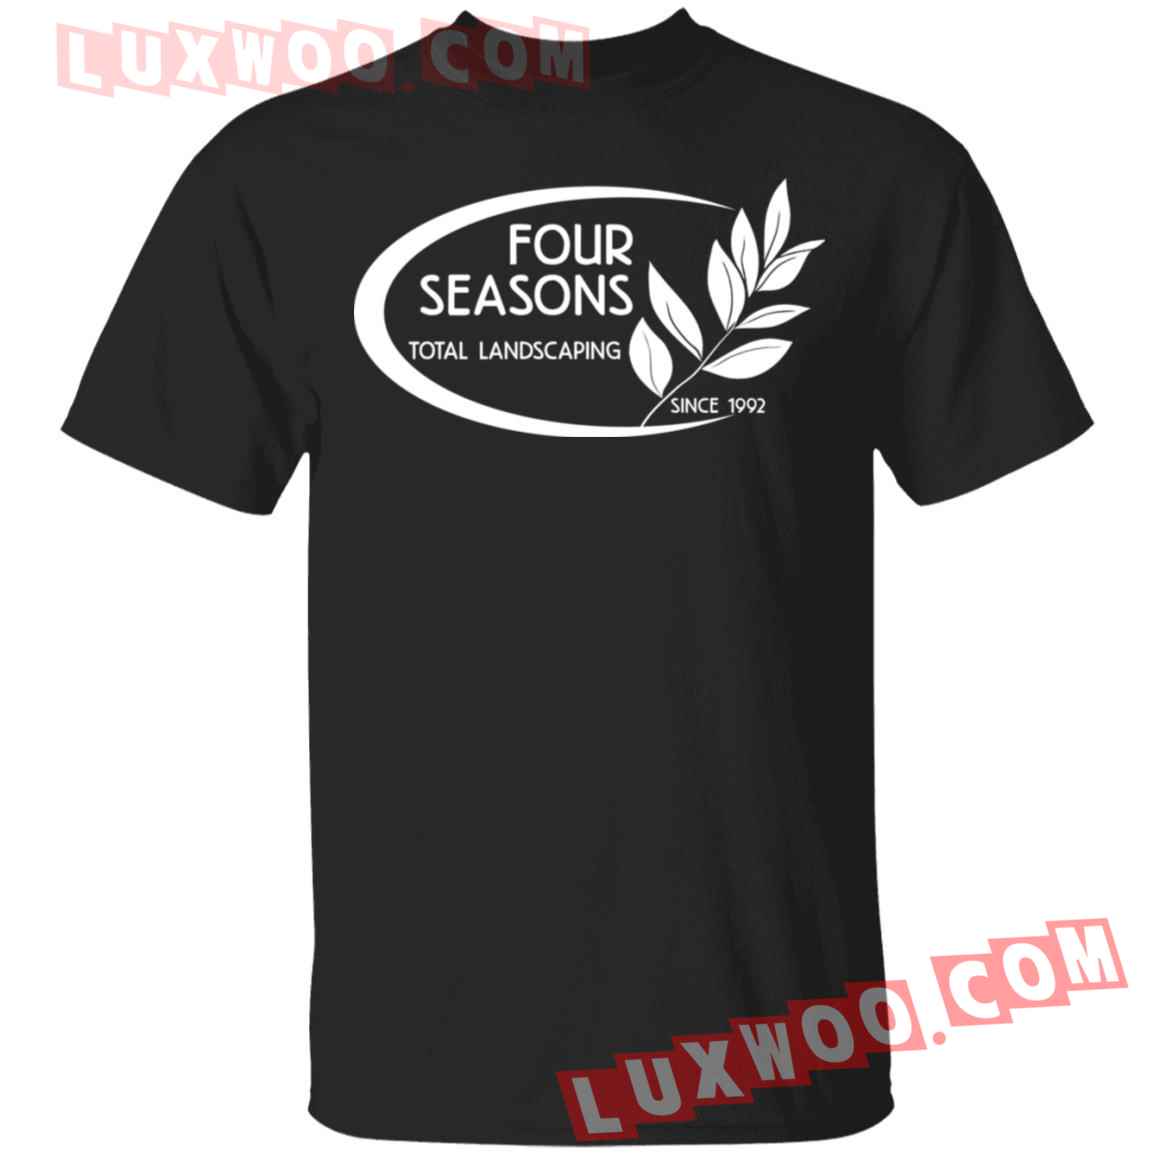 Four Seasons Total Landscaping Since 1992 Shirt